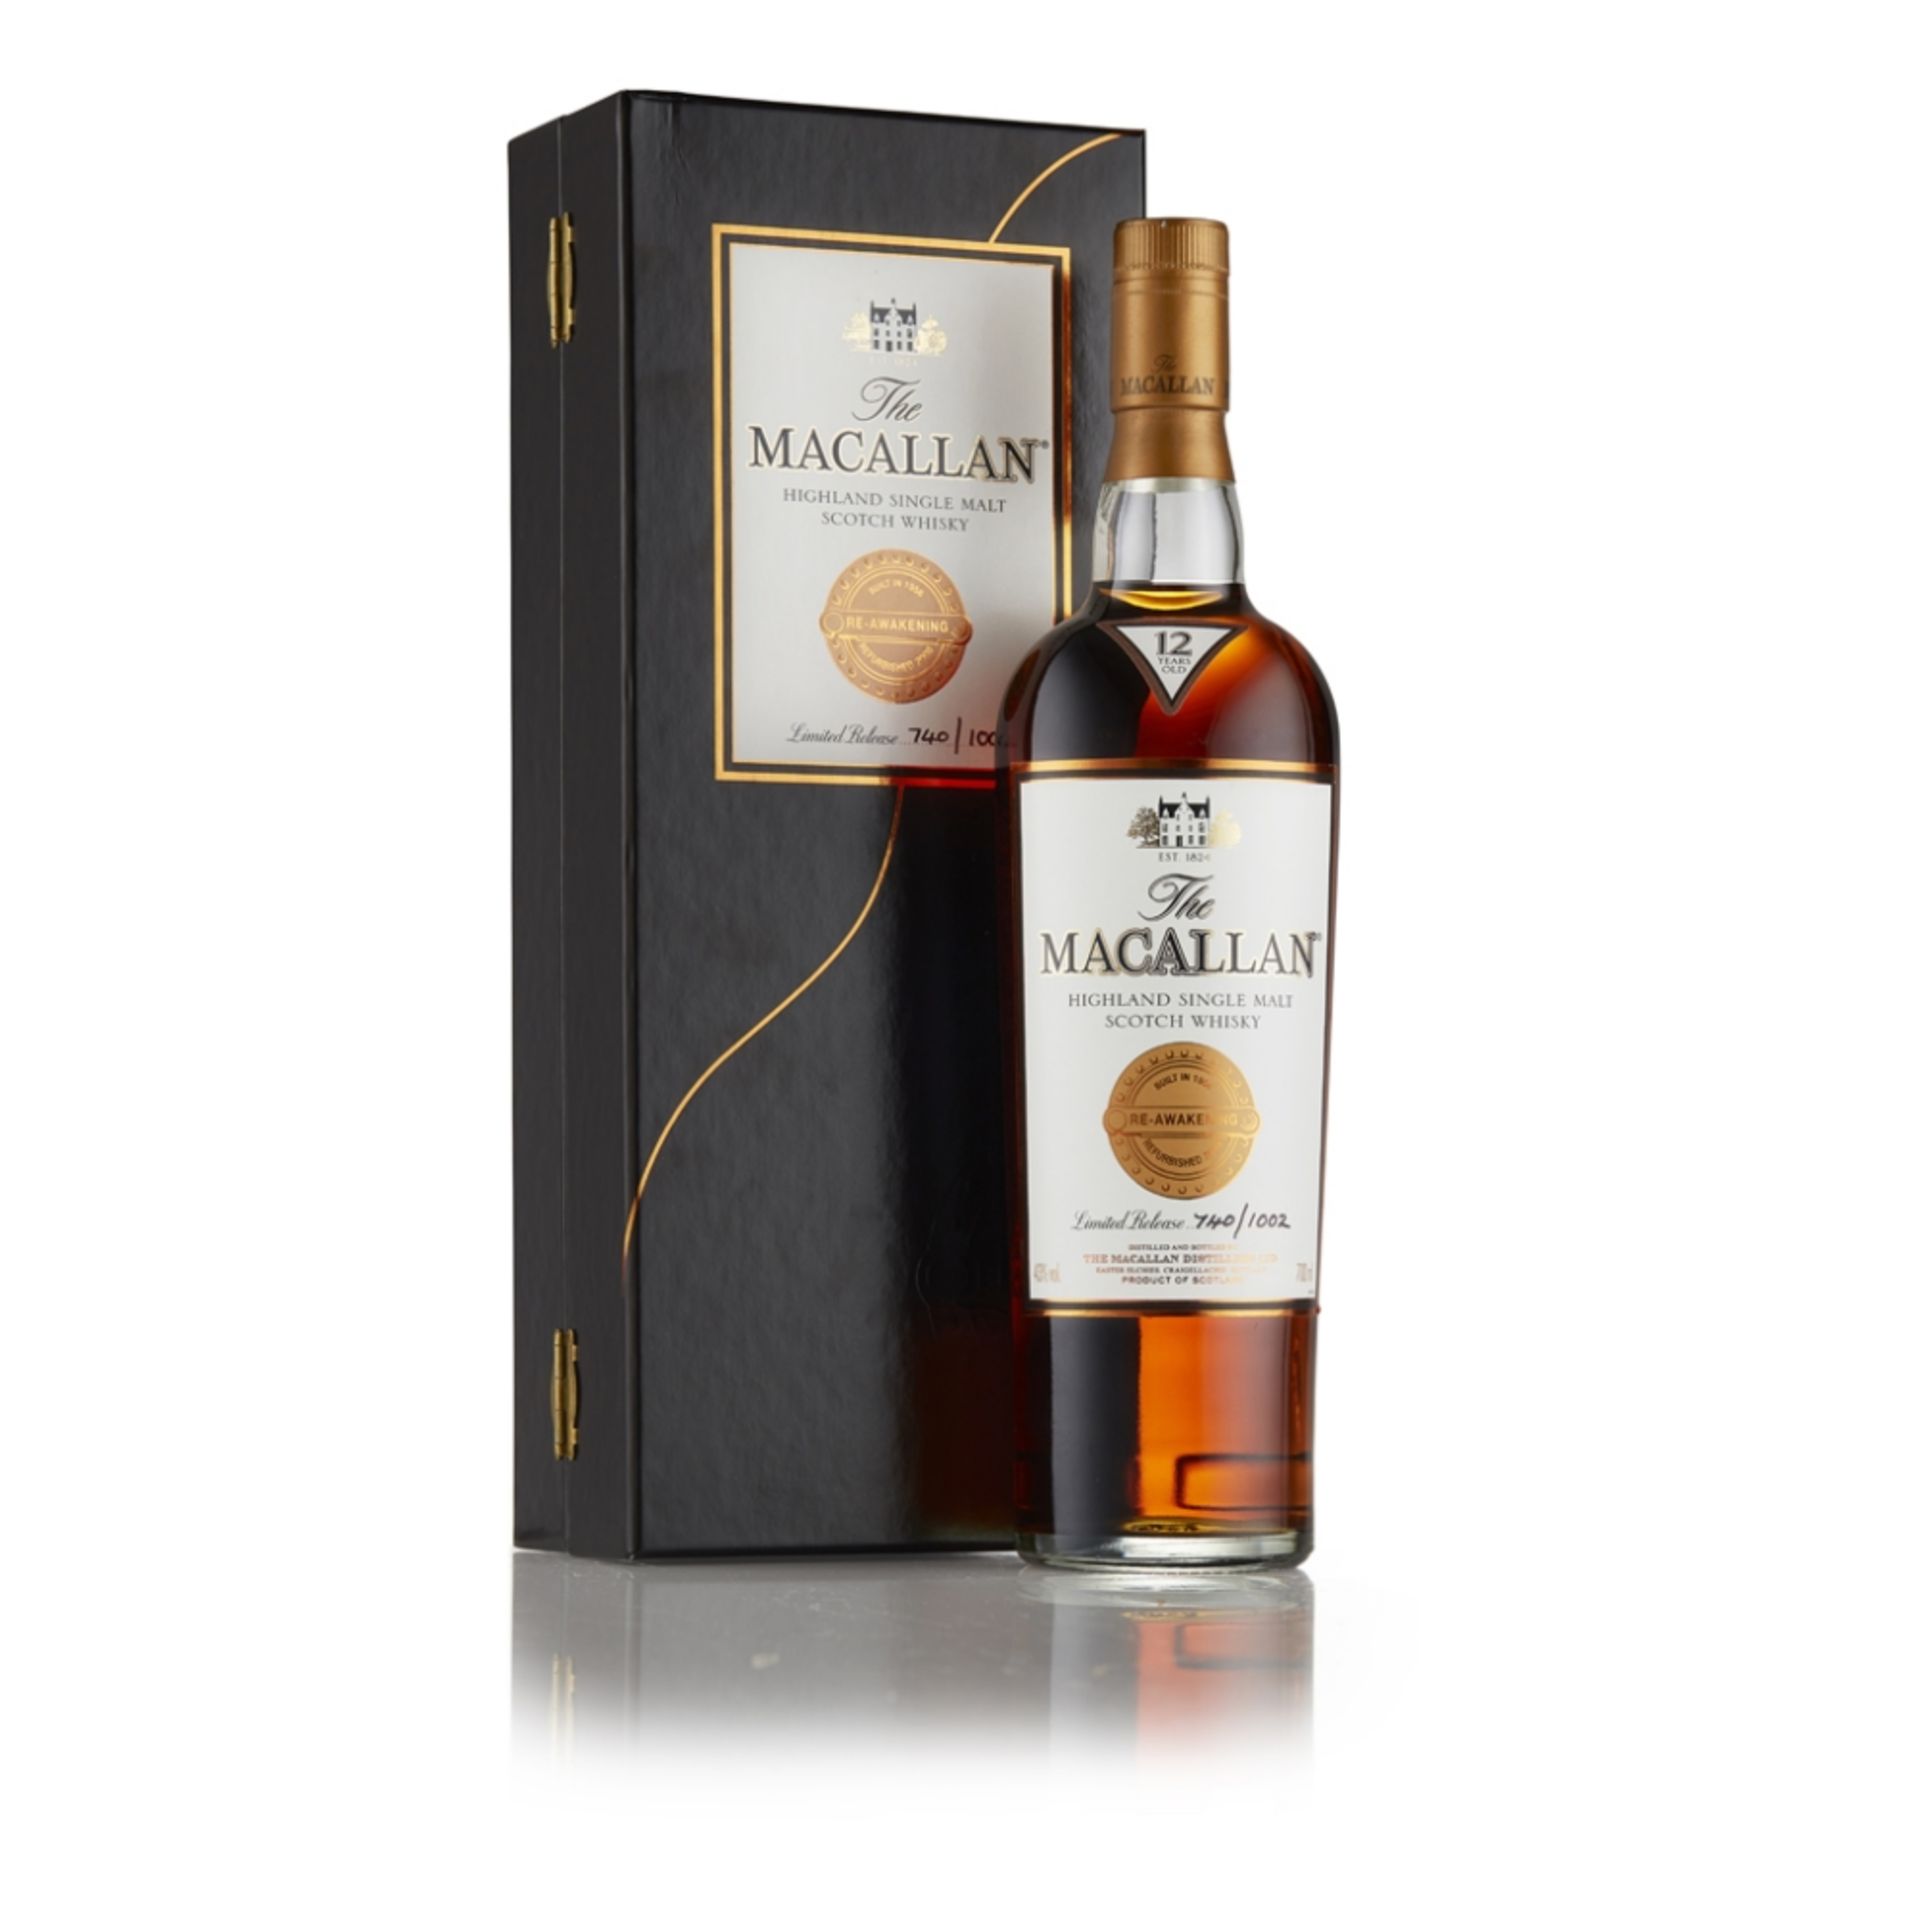 THE MACALLAN RE-AWAKENING 12 YEAR OLD number 740 of 1002, bottled in 2009 to commemorate the - Image 3 of 3